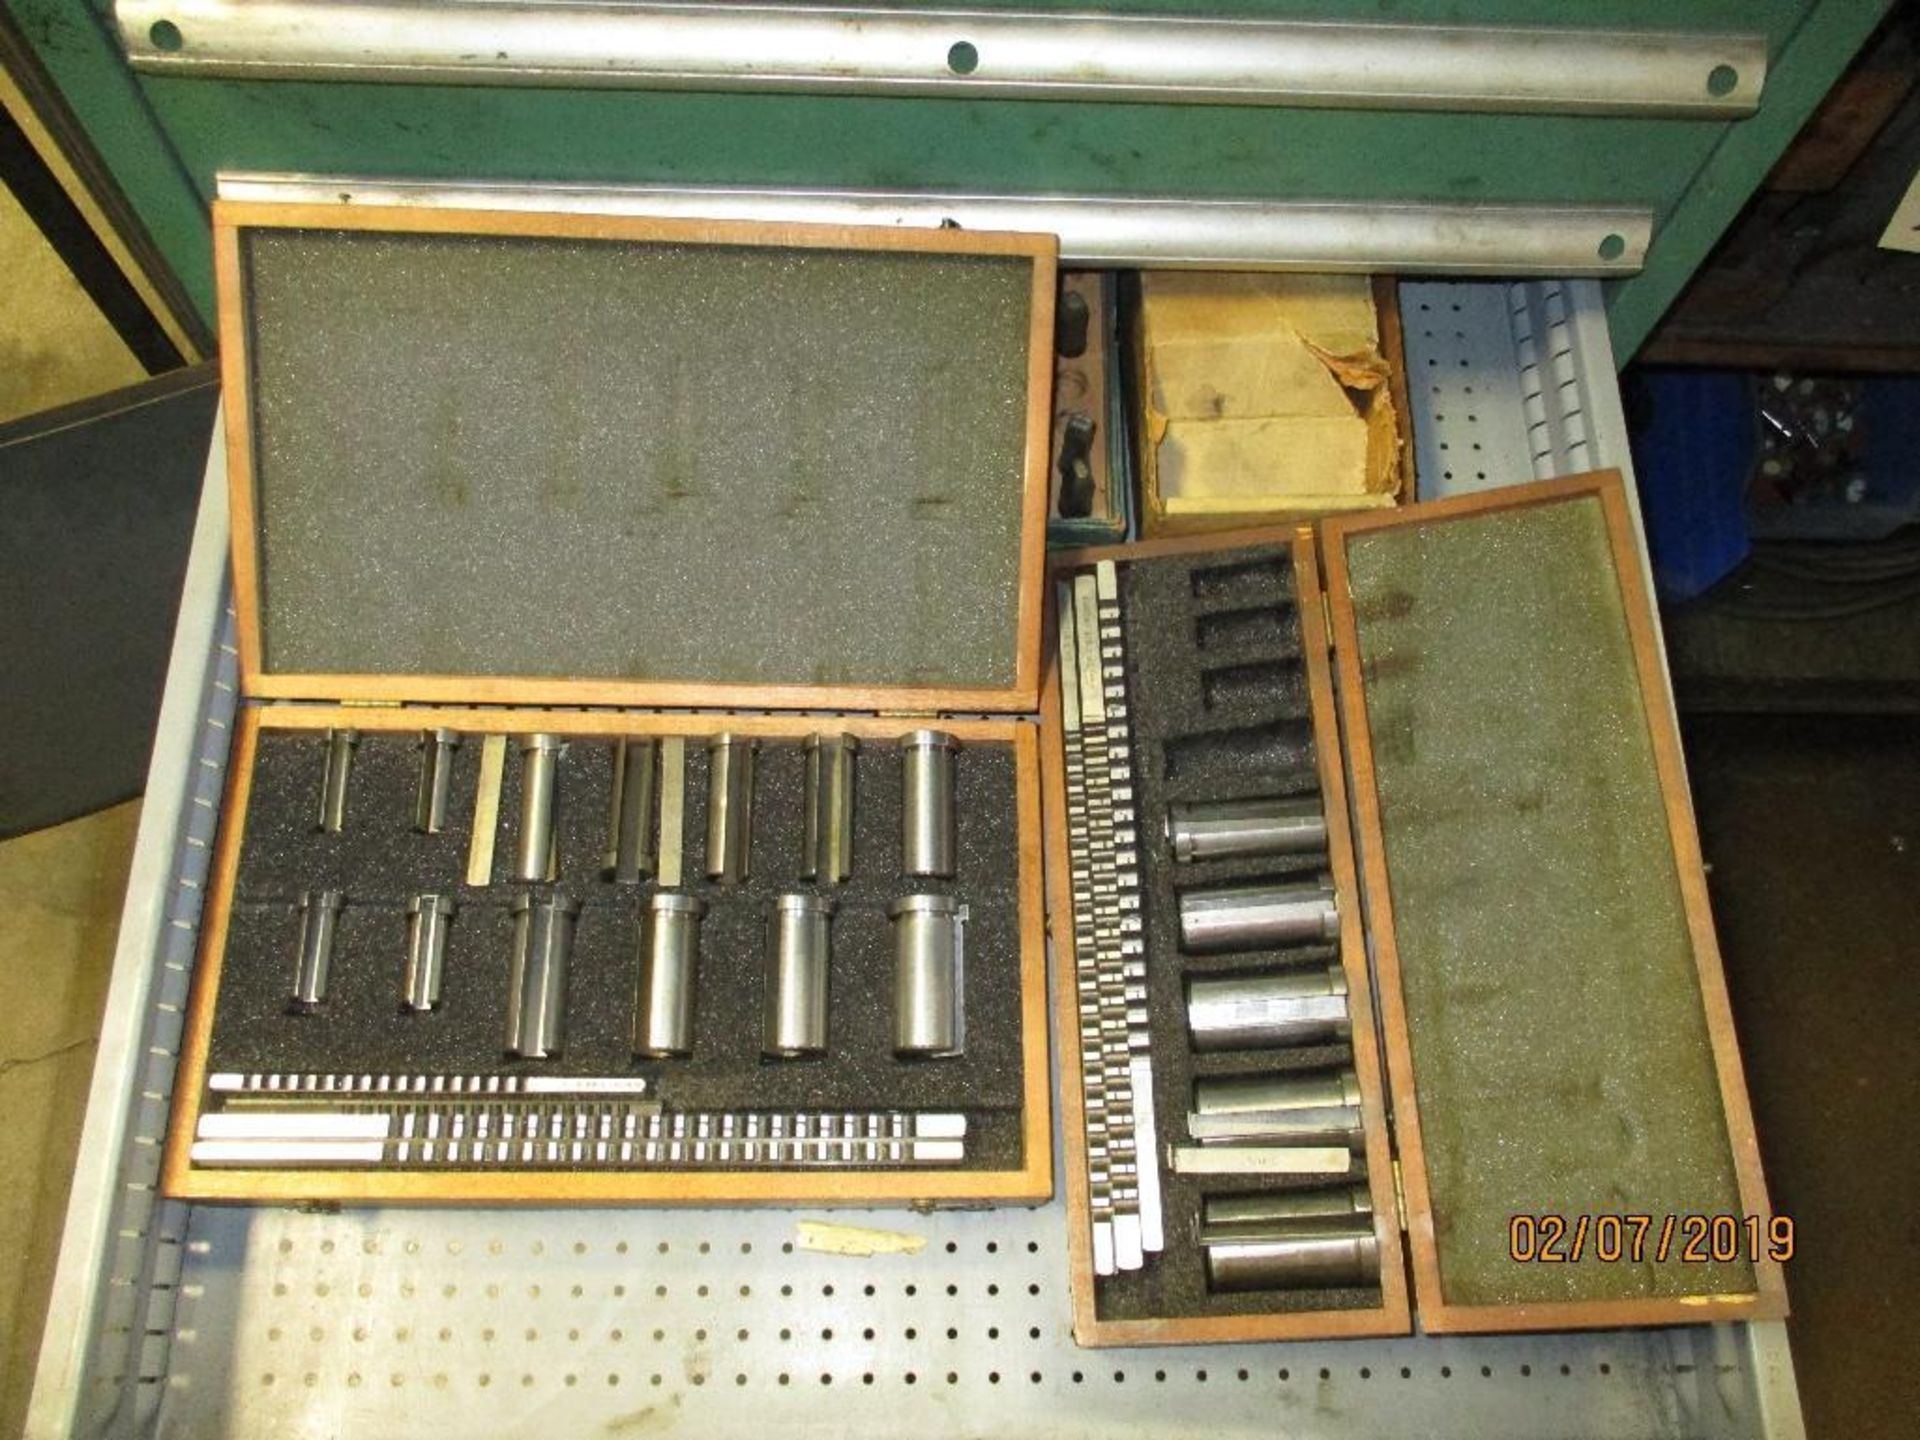 Cabinet Plus Contents of Micrometers, Calibers, Keyways, Helicoils etc. - Image 2 of 10